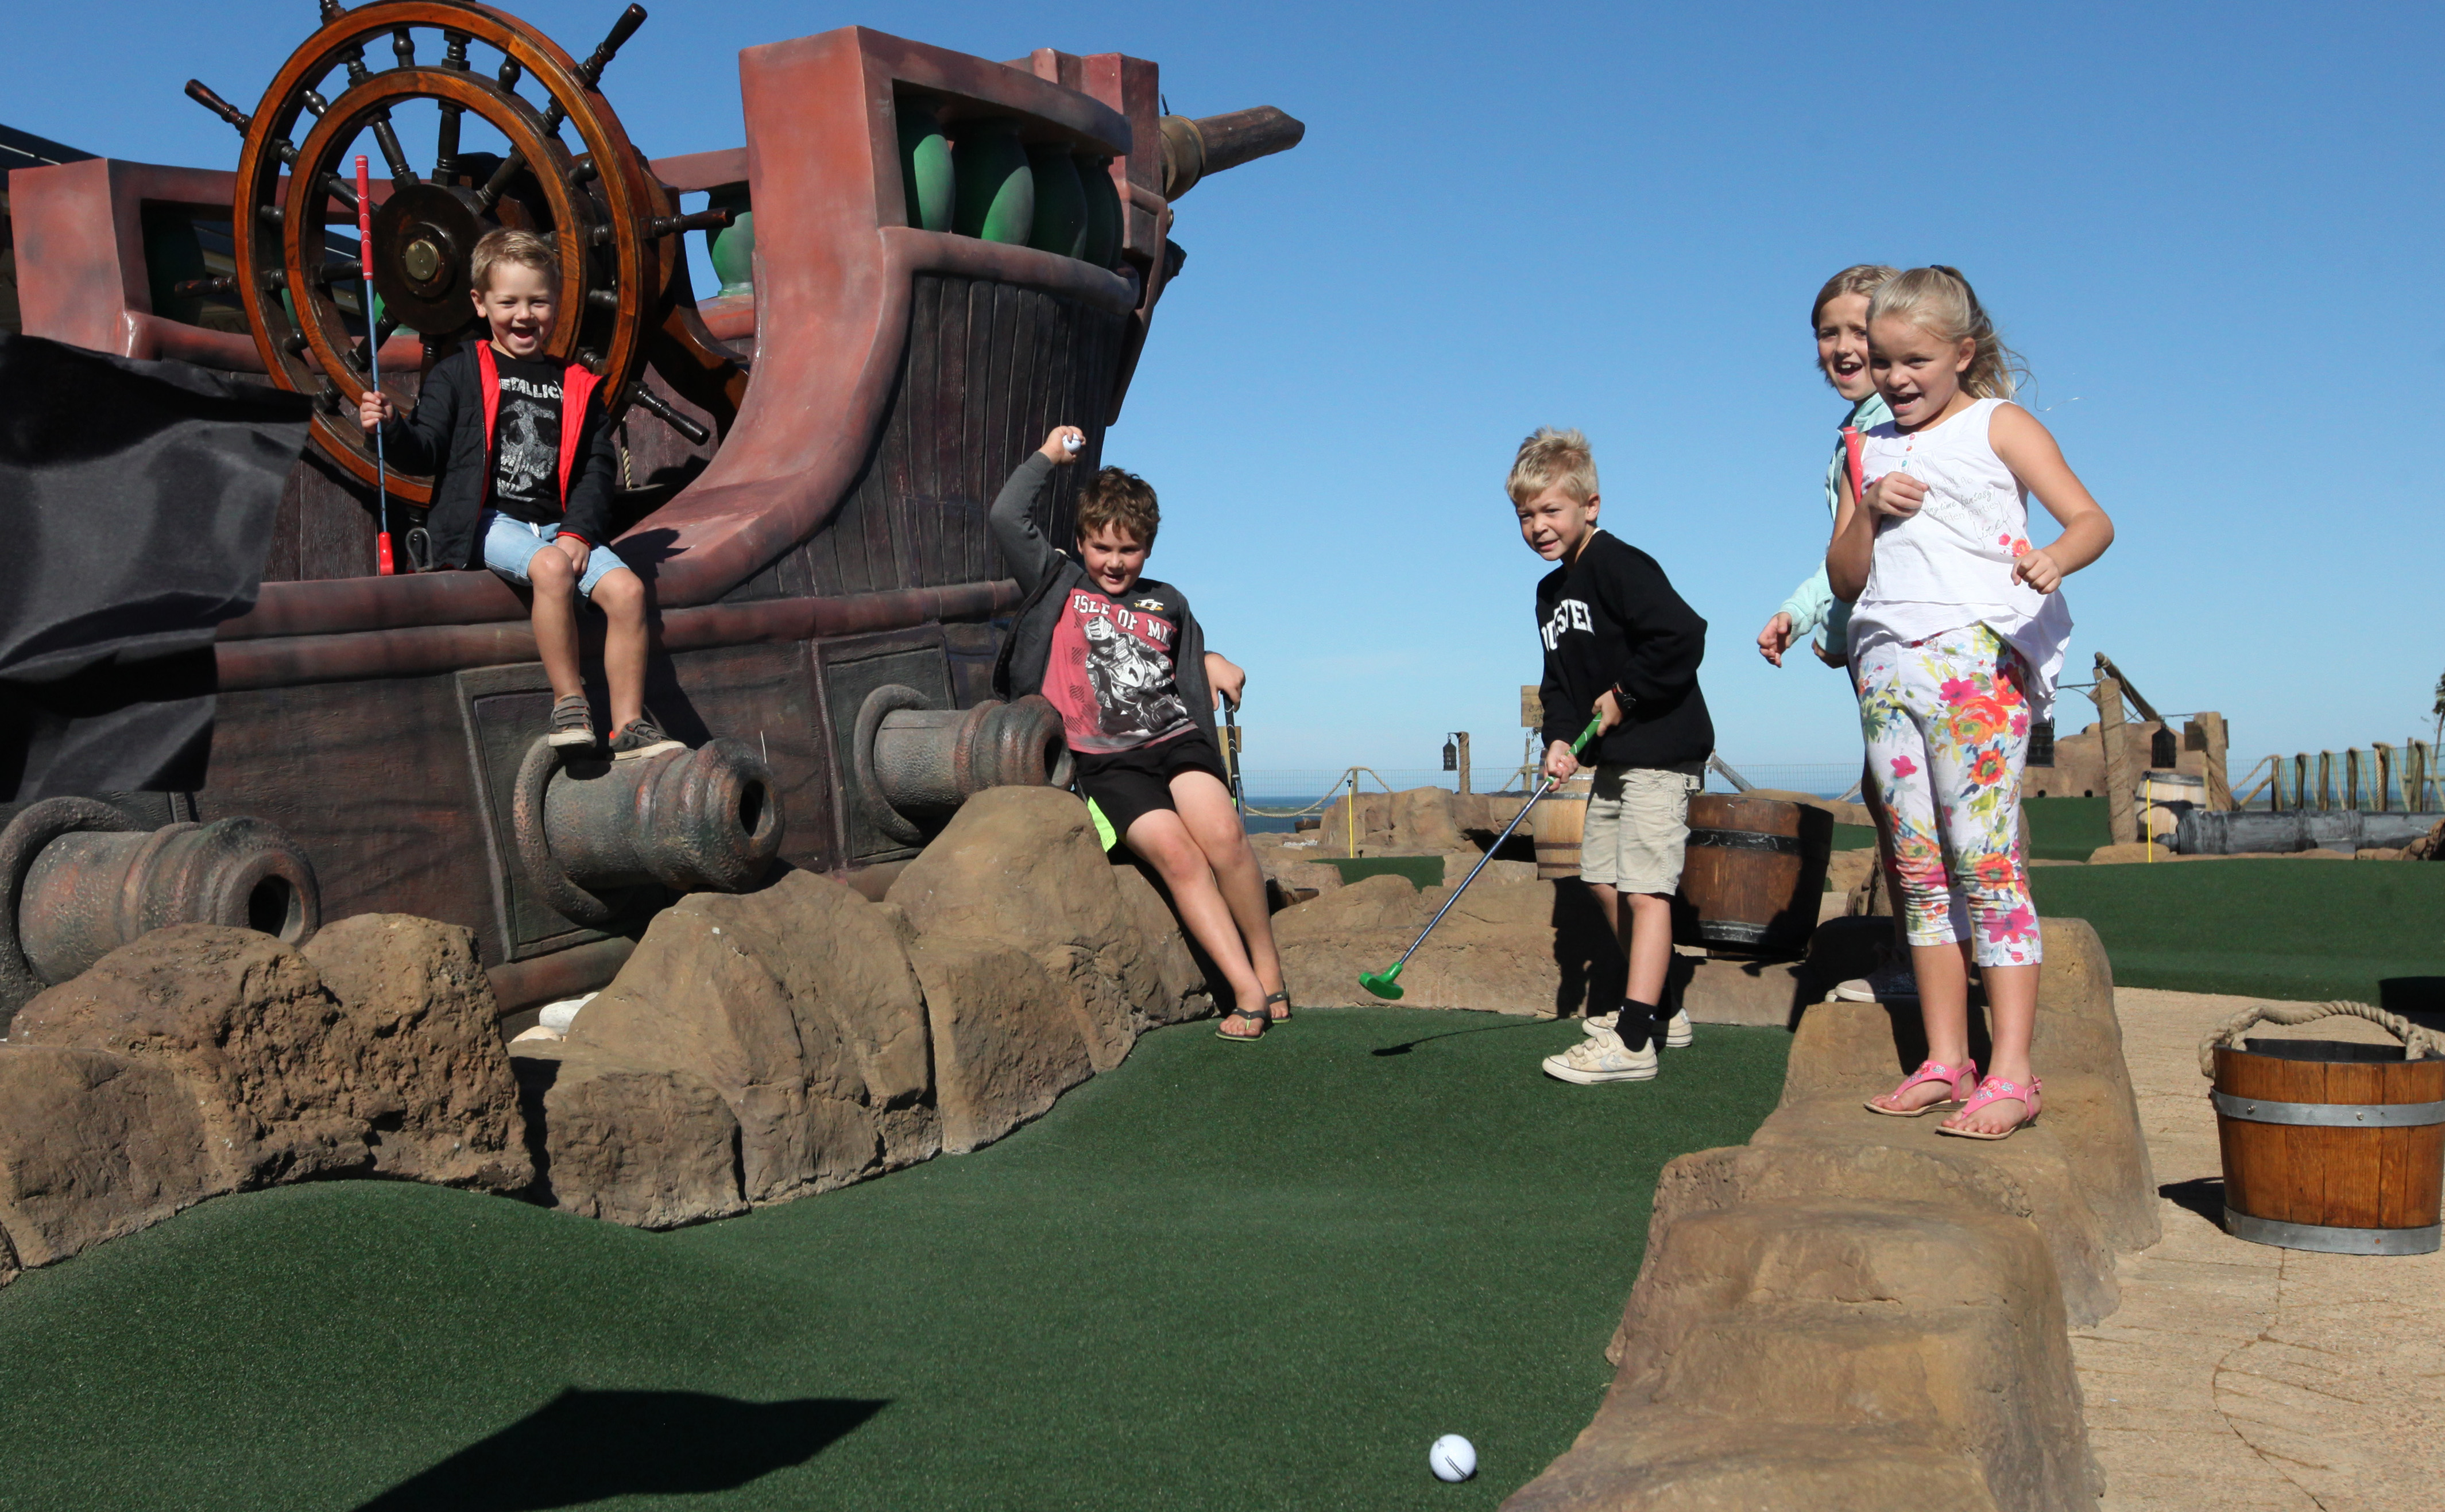 Win a Family Day at Pirate Adventure Golf and Splash Pad @BenguelaCove